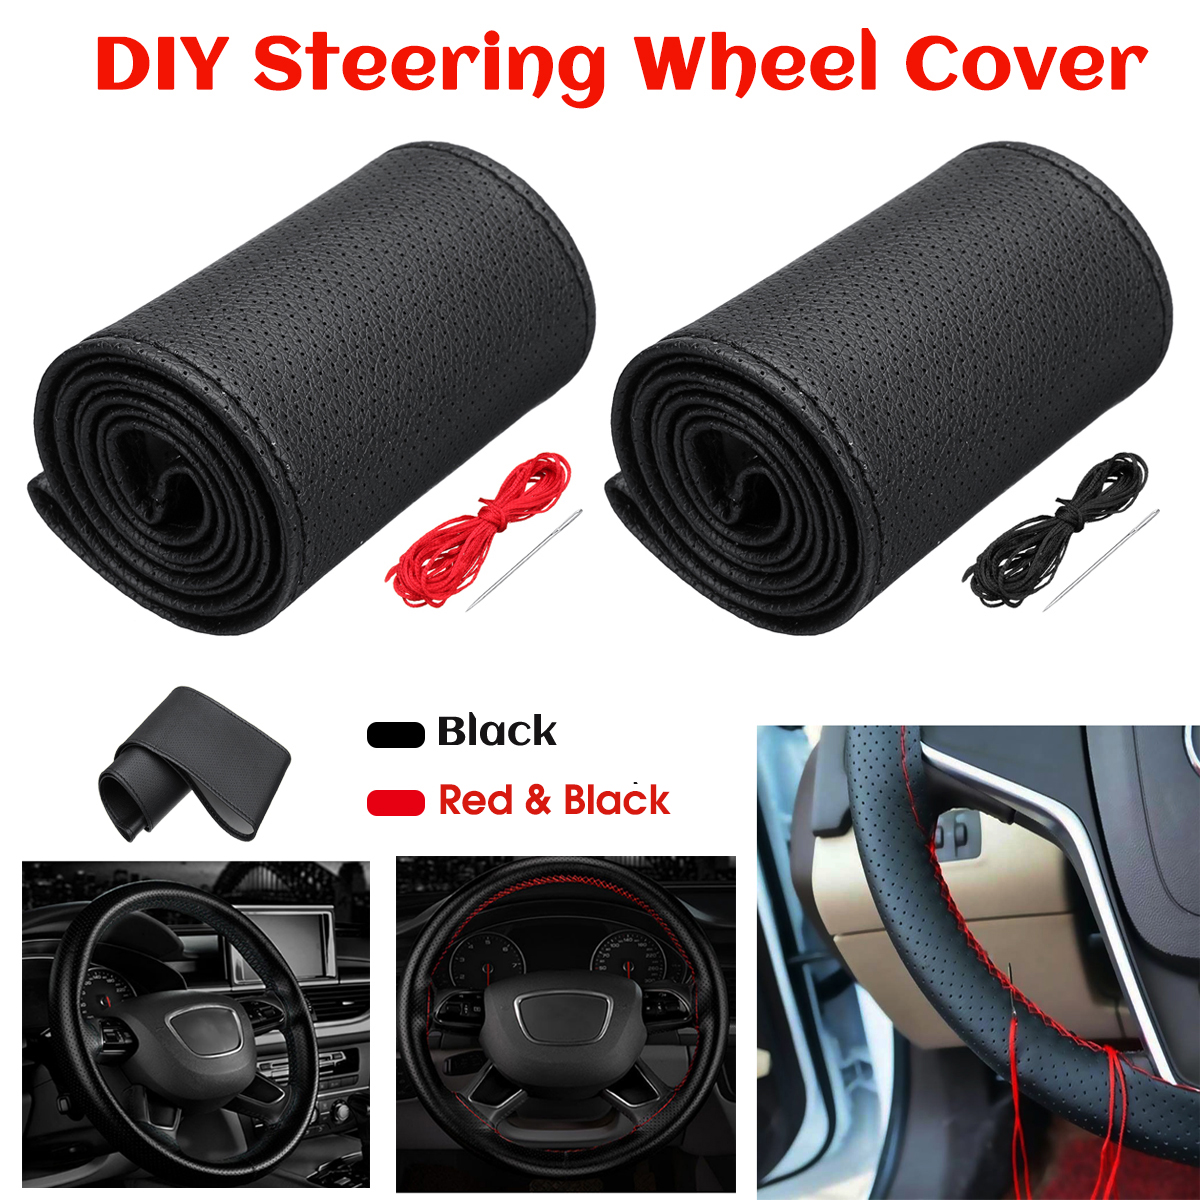 DIY-Car-Steering-Wheel-Covers-PU-Leather-Protector-with-Needle-and-Thread-37-38cm-Universal-1428768